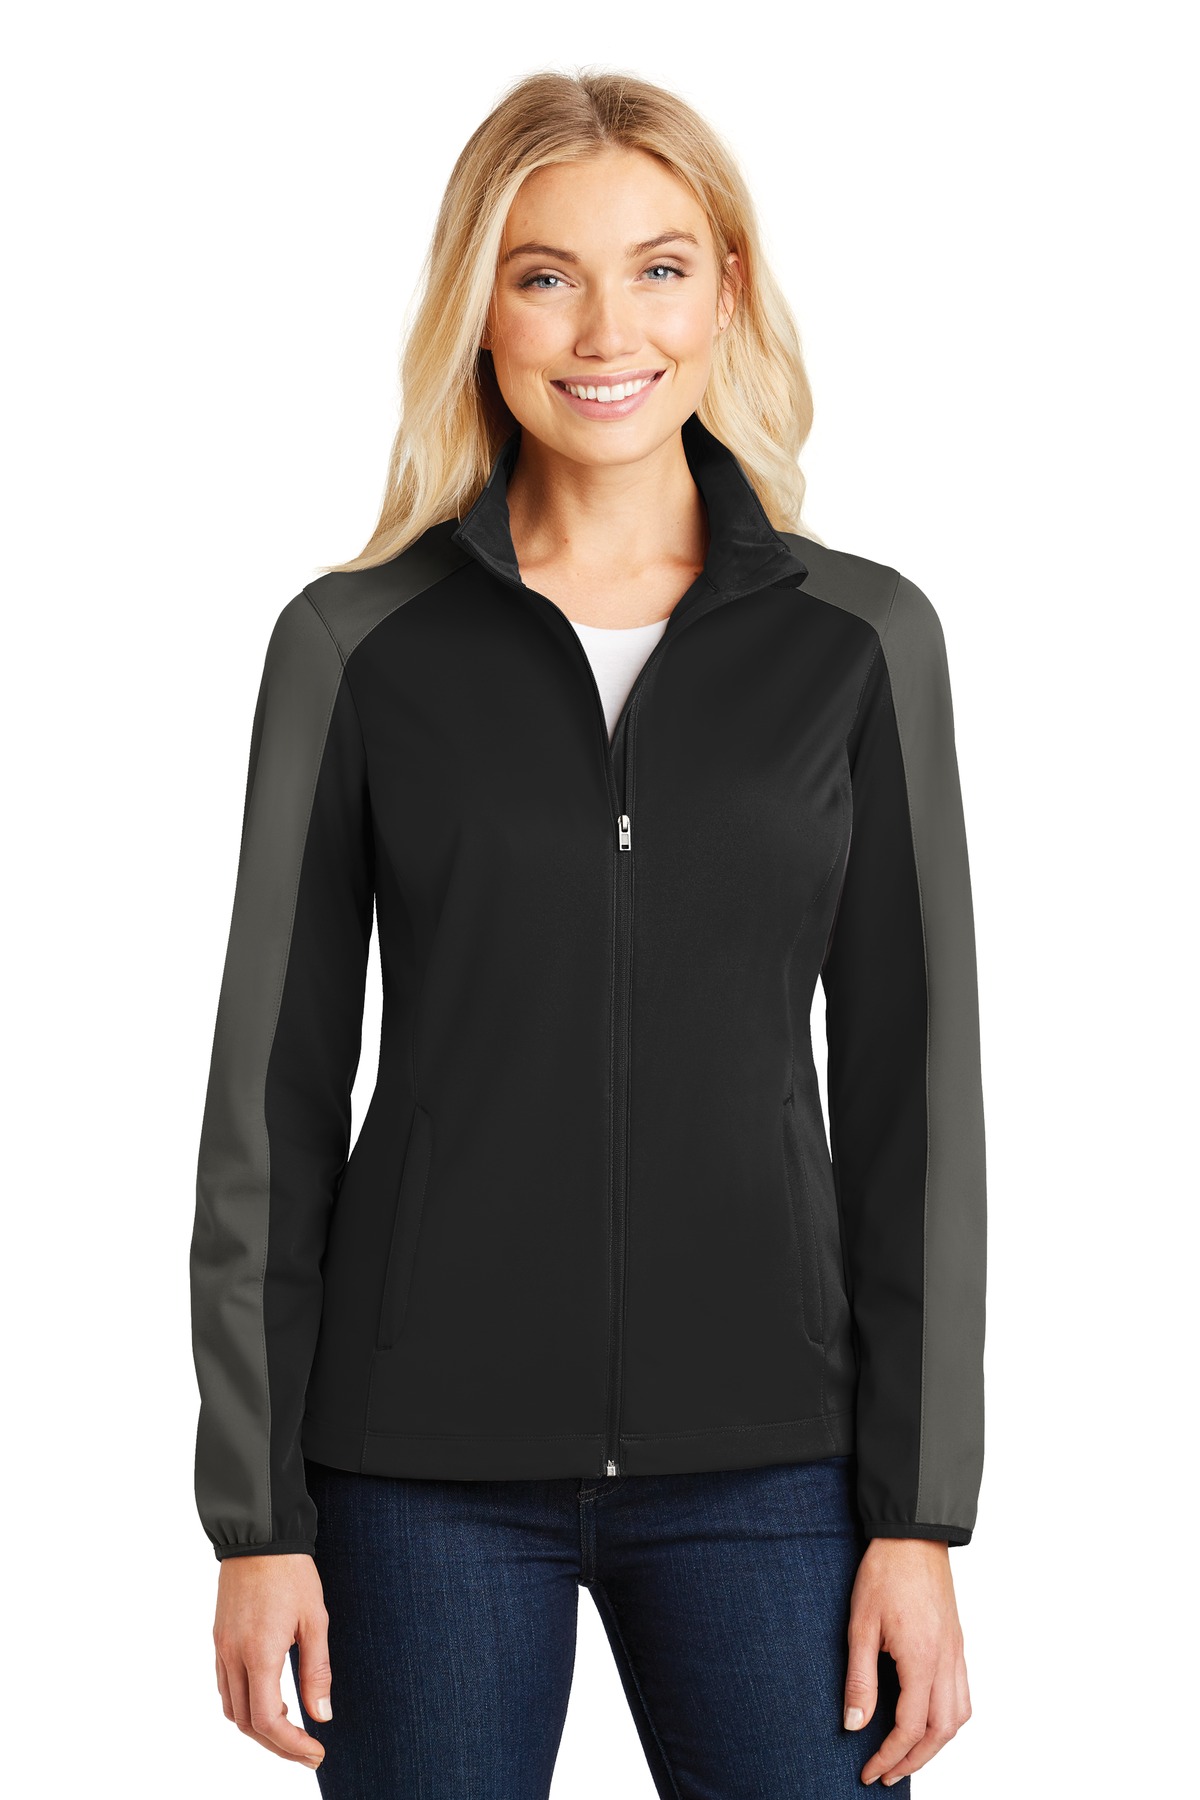 Port Authority Ladies Outerwear for Corporate & Hospitality ® Ladies Active Colorblock Soft Shell Jacket.-Port Authority